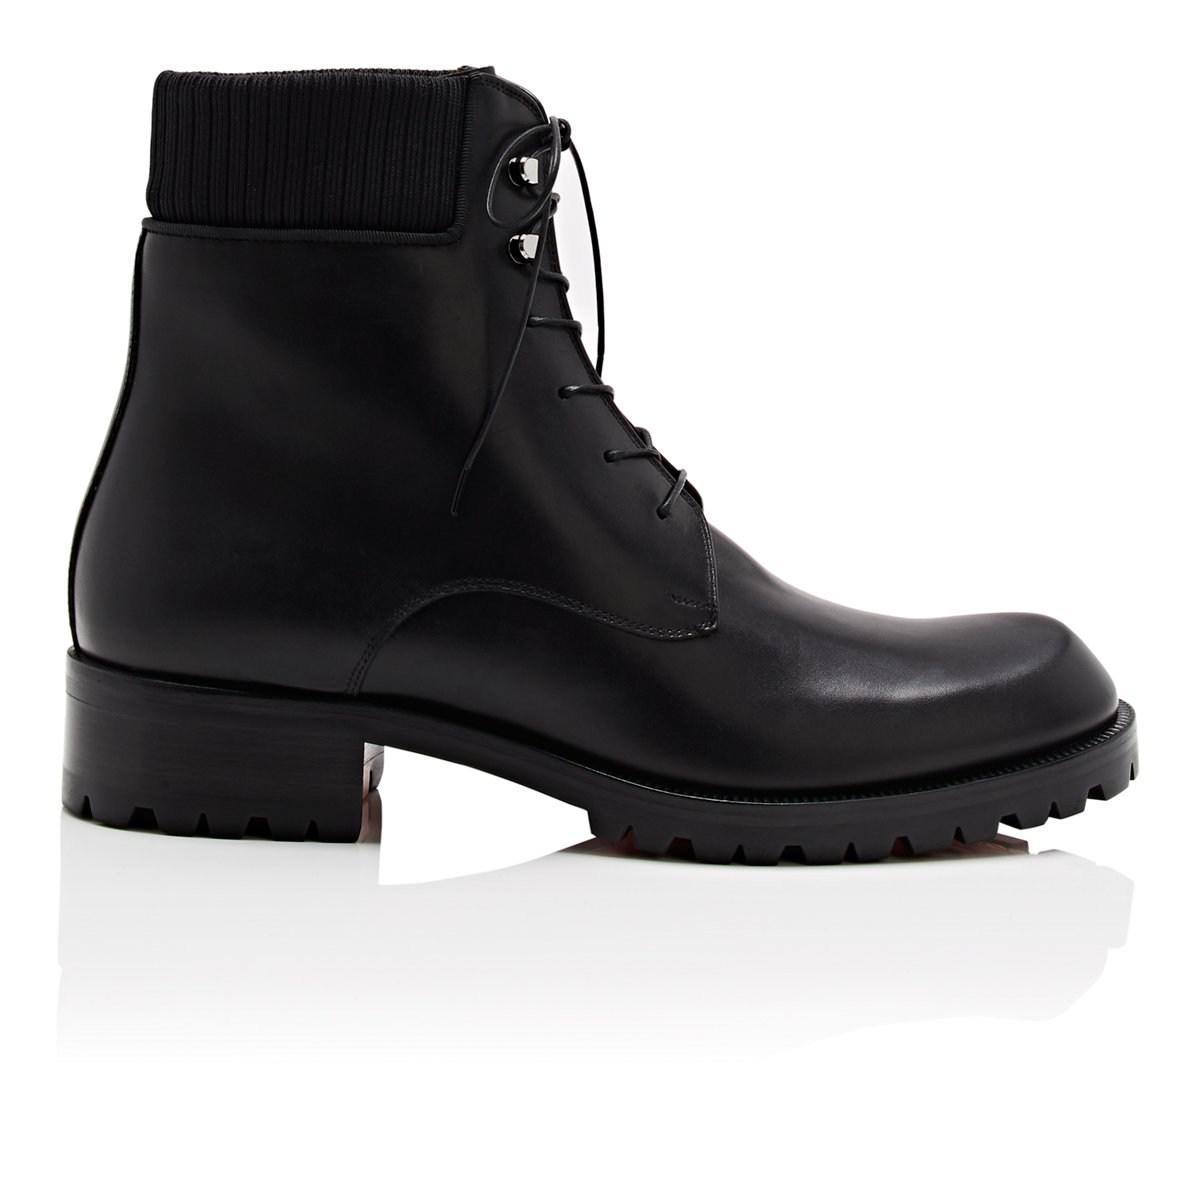 Christian Louboutin Trapman Leather Boots in Black for Men - Lyst